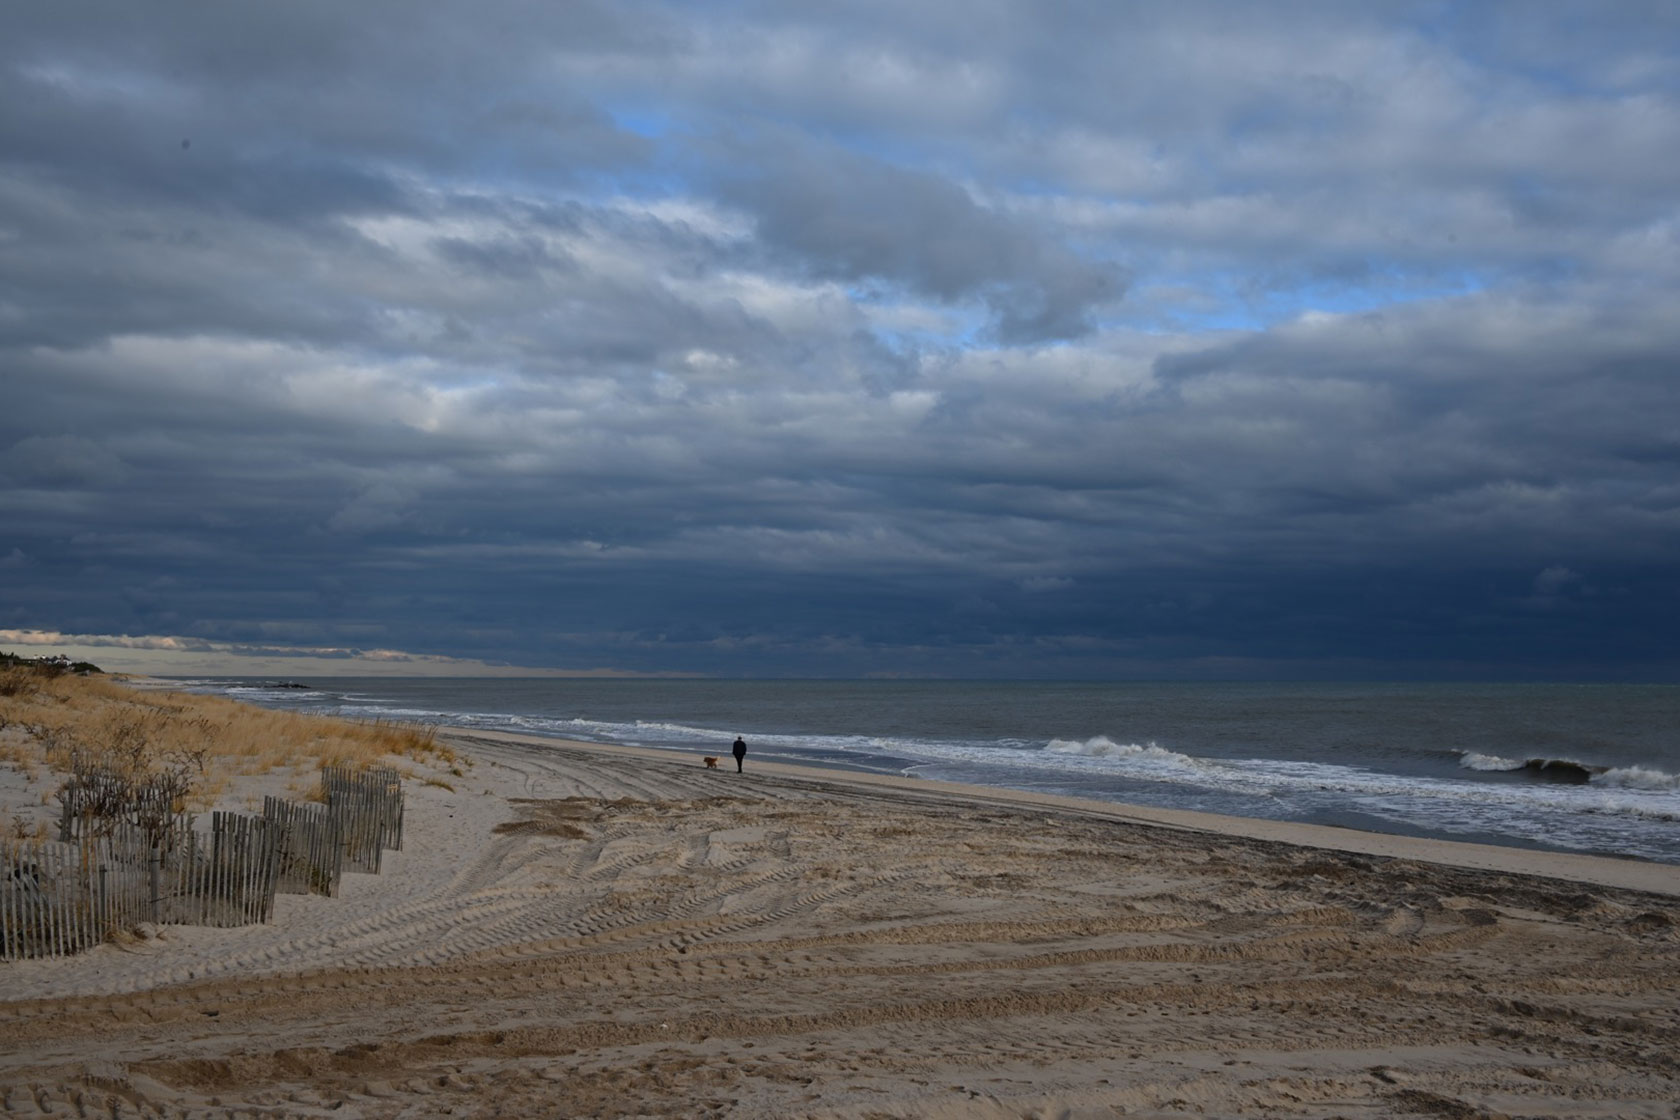 Photo shows a man and his dog in the distance on an otherwise empty beach on a cloudy day